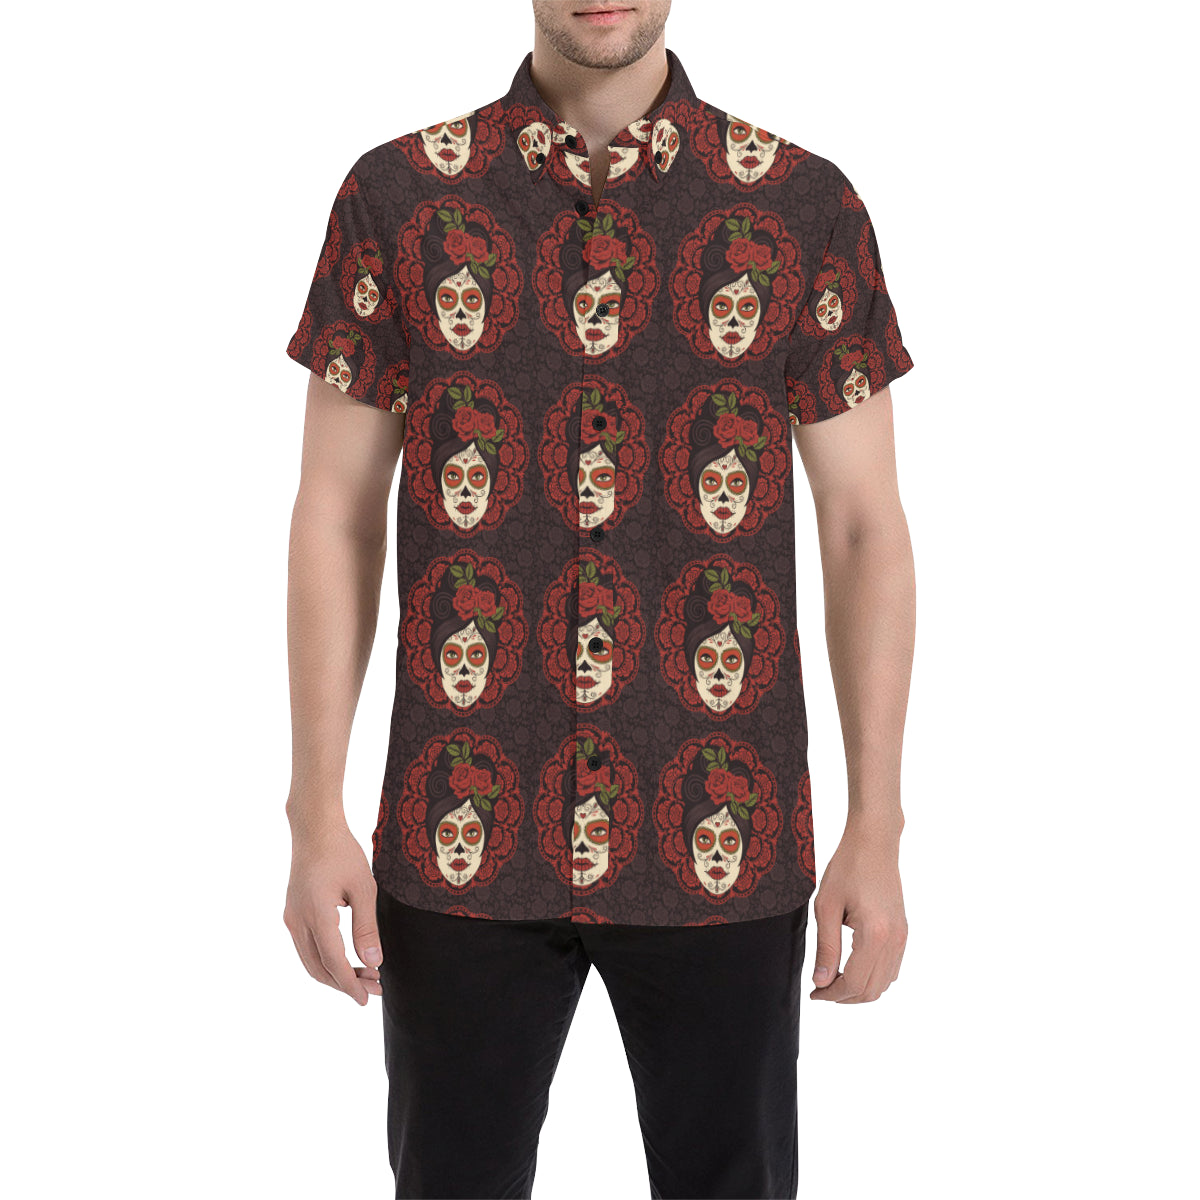 Day of the Dead Mexican Girl Men's Short Sleeve Button Up Shirt